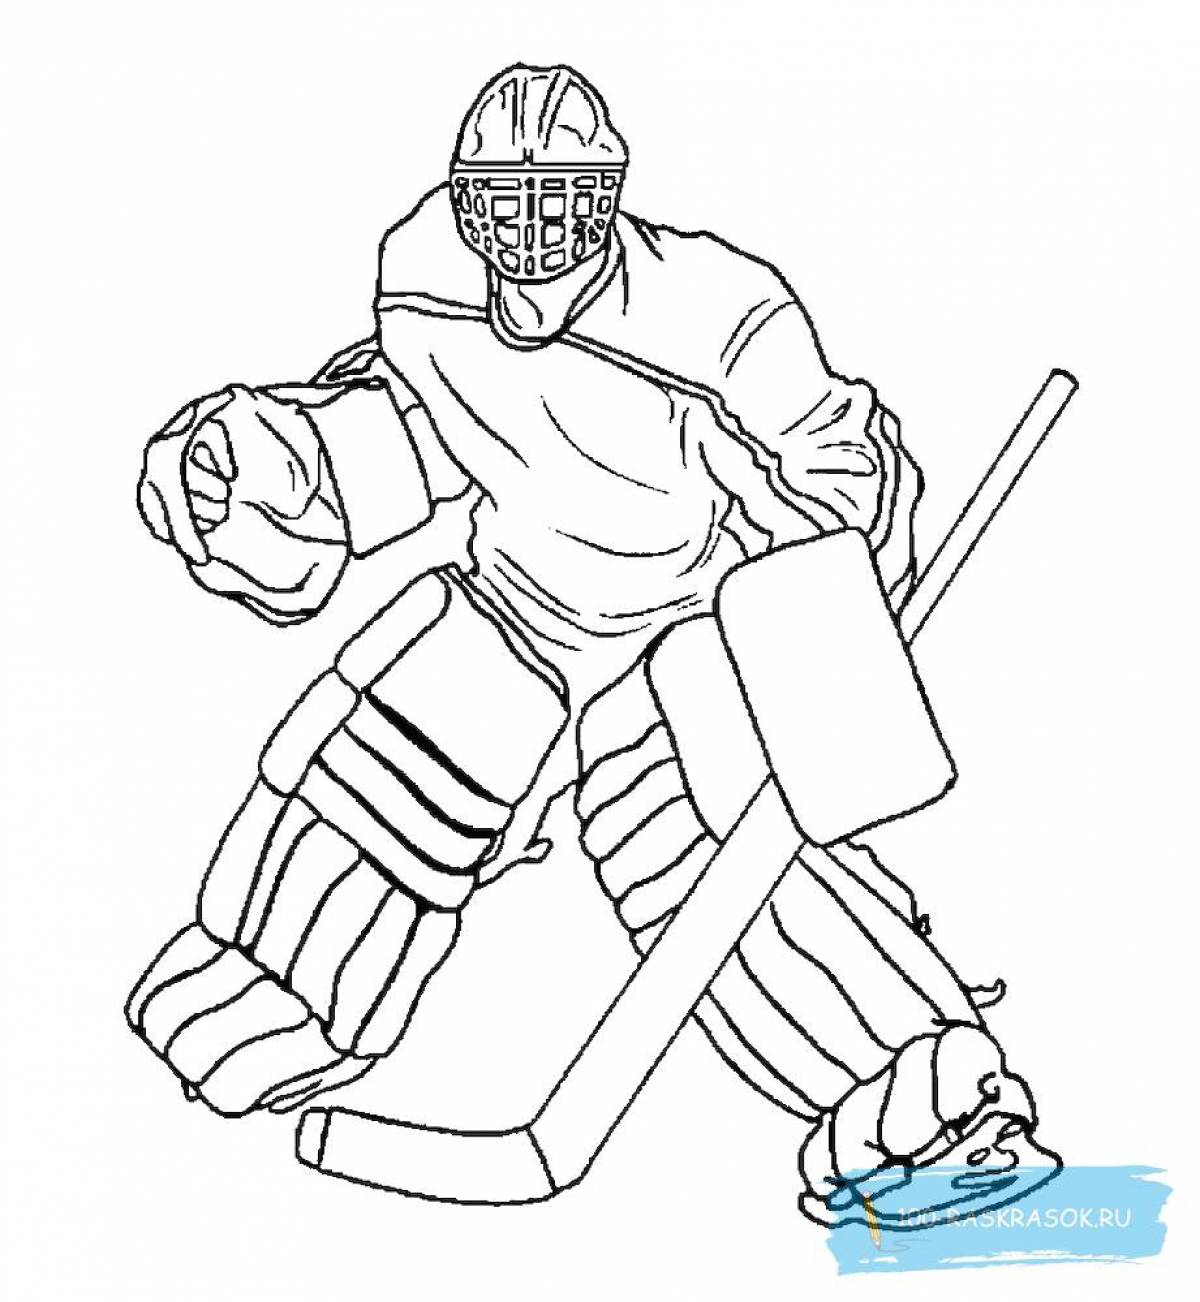 Colorful hockey player coloring page for kids